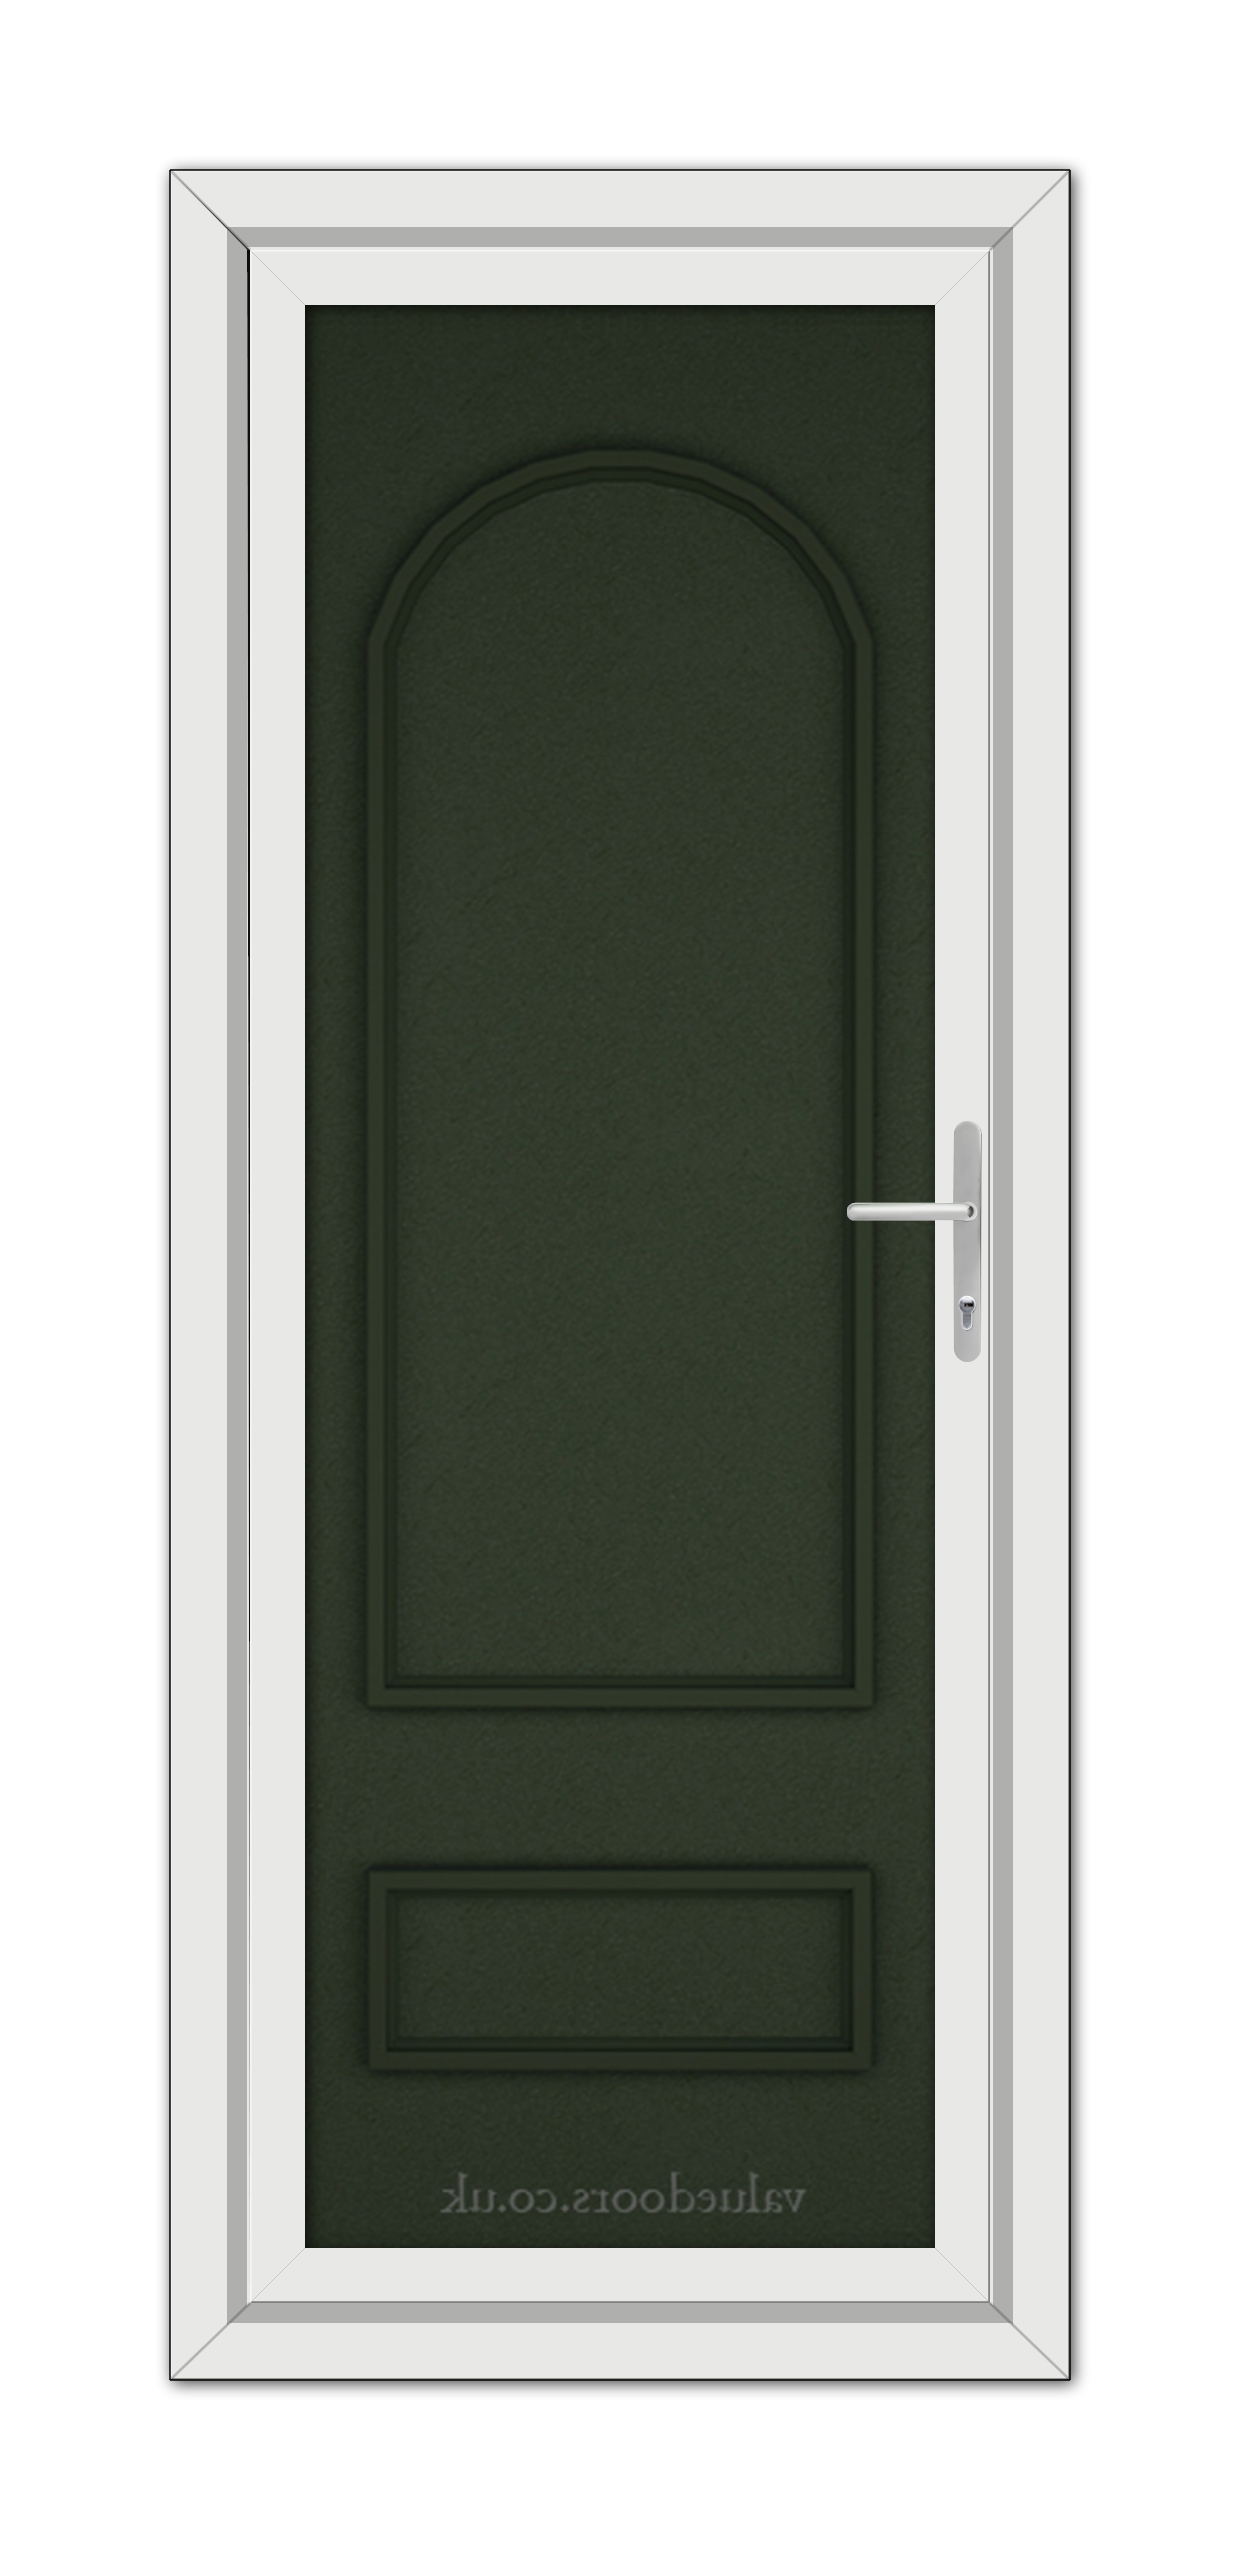 A Green Canterbury Solid uPVC Door within a white frame, featuring an arched design and a modern handle on the right side.